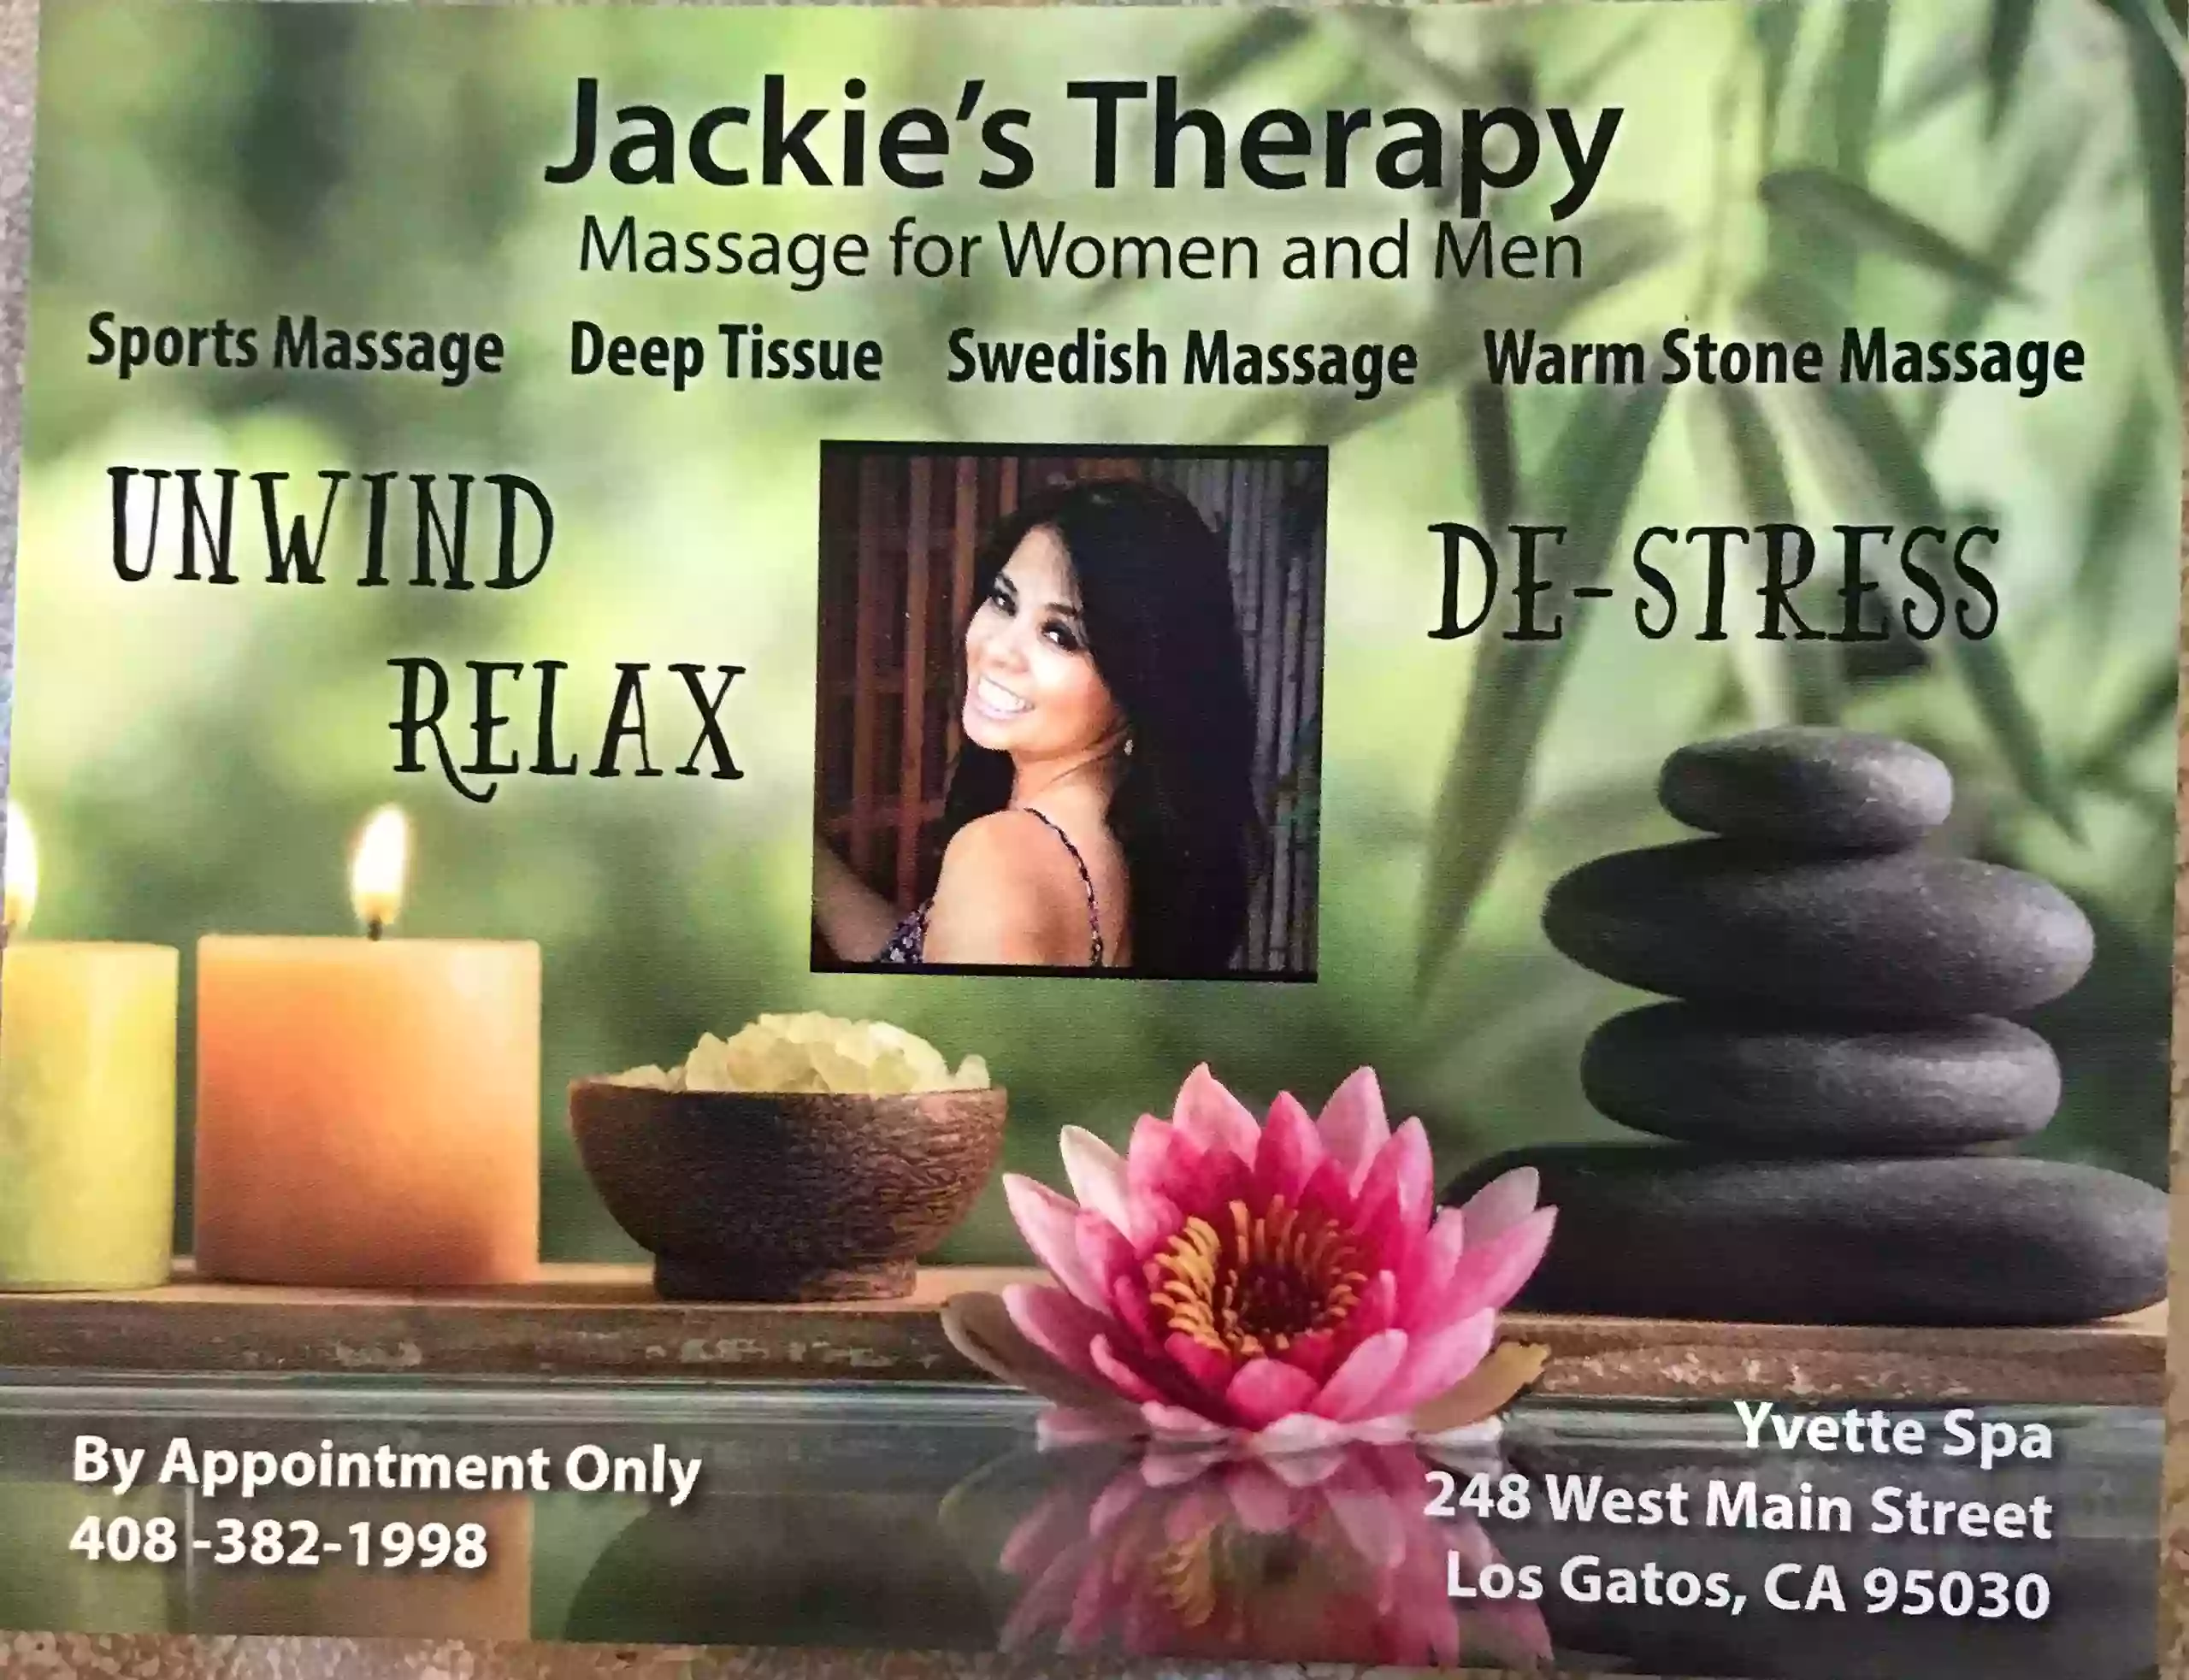 Jackie's Therapy